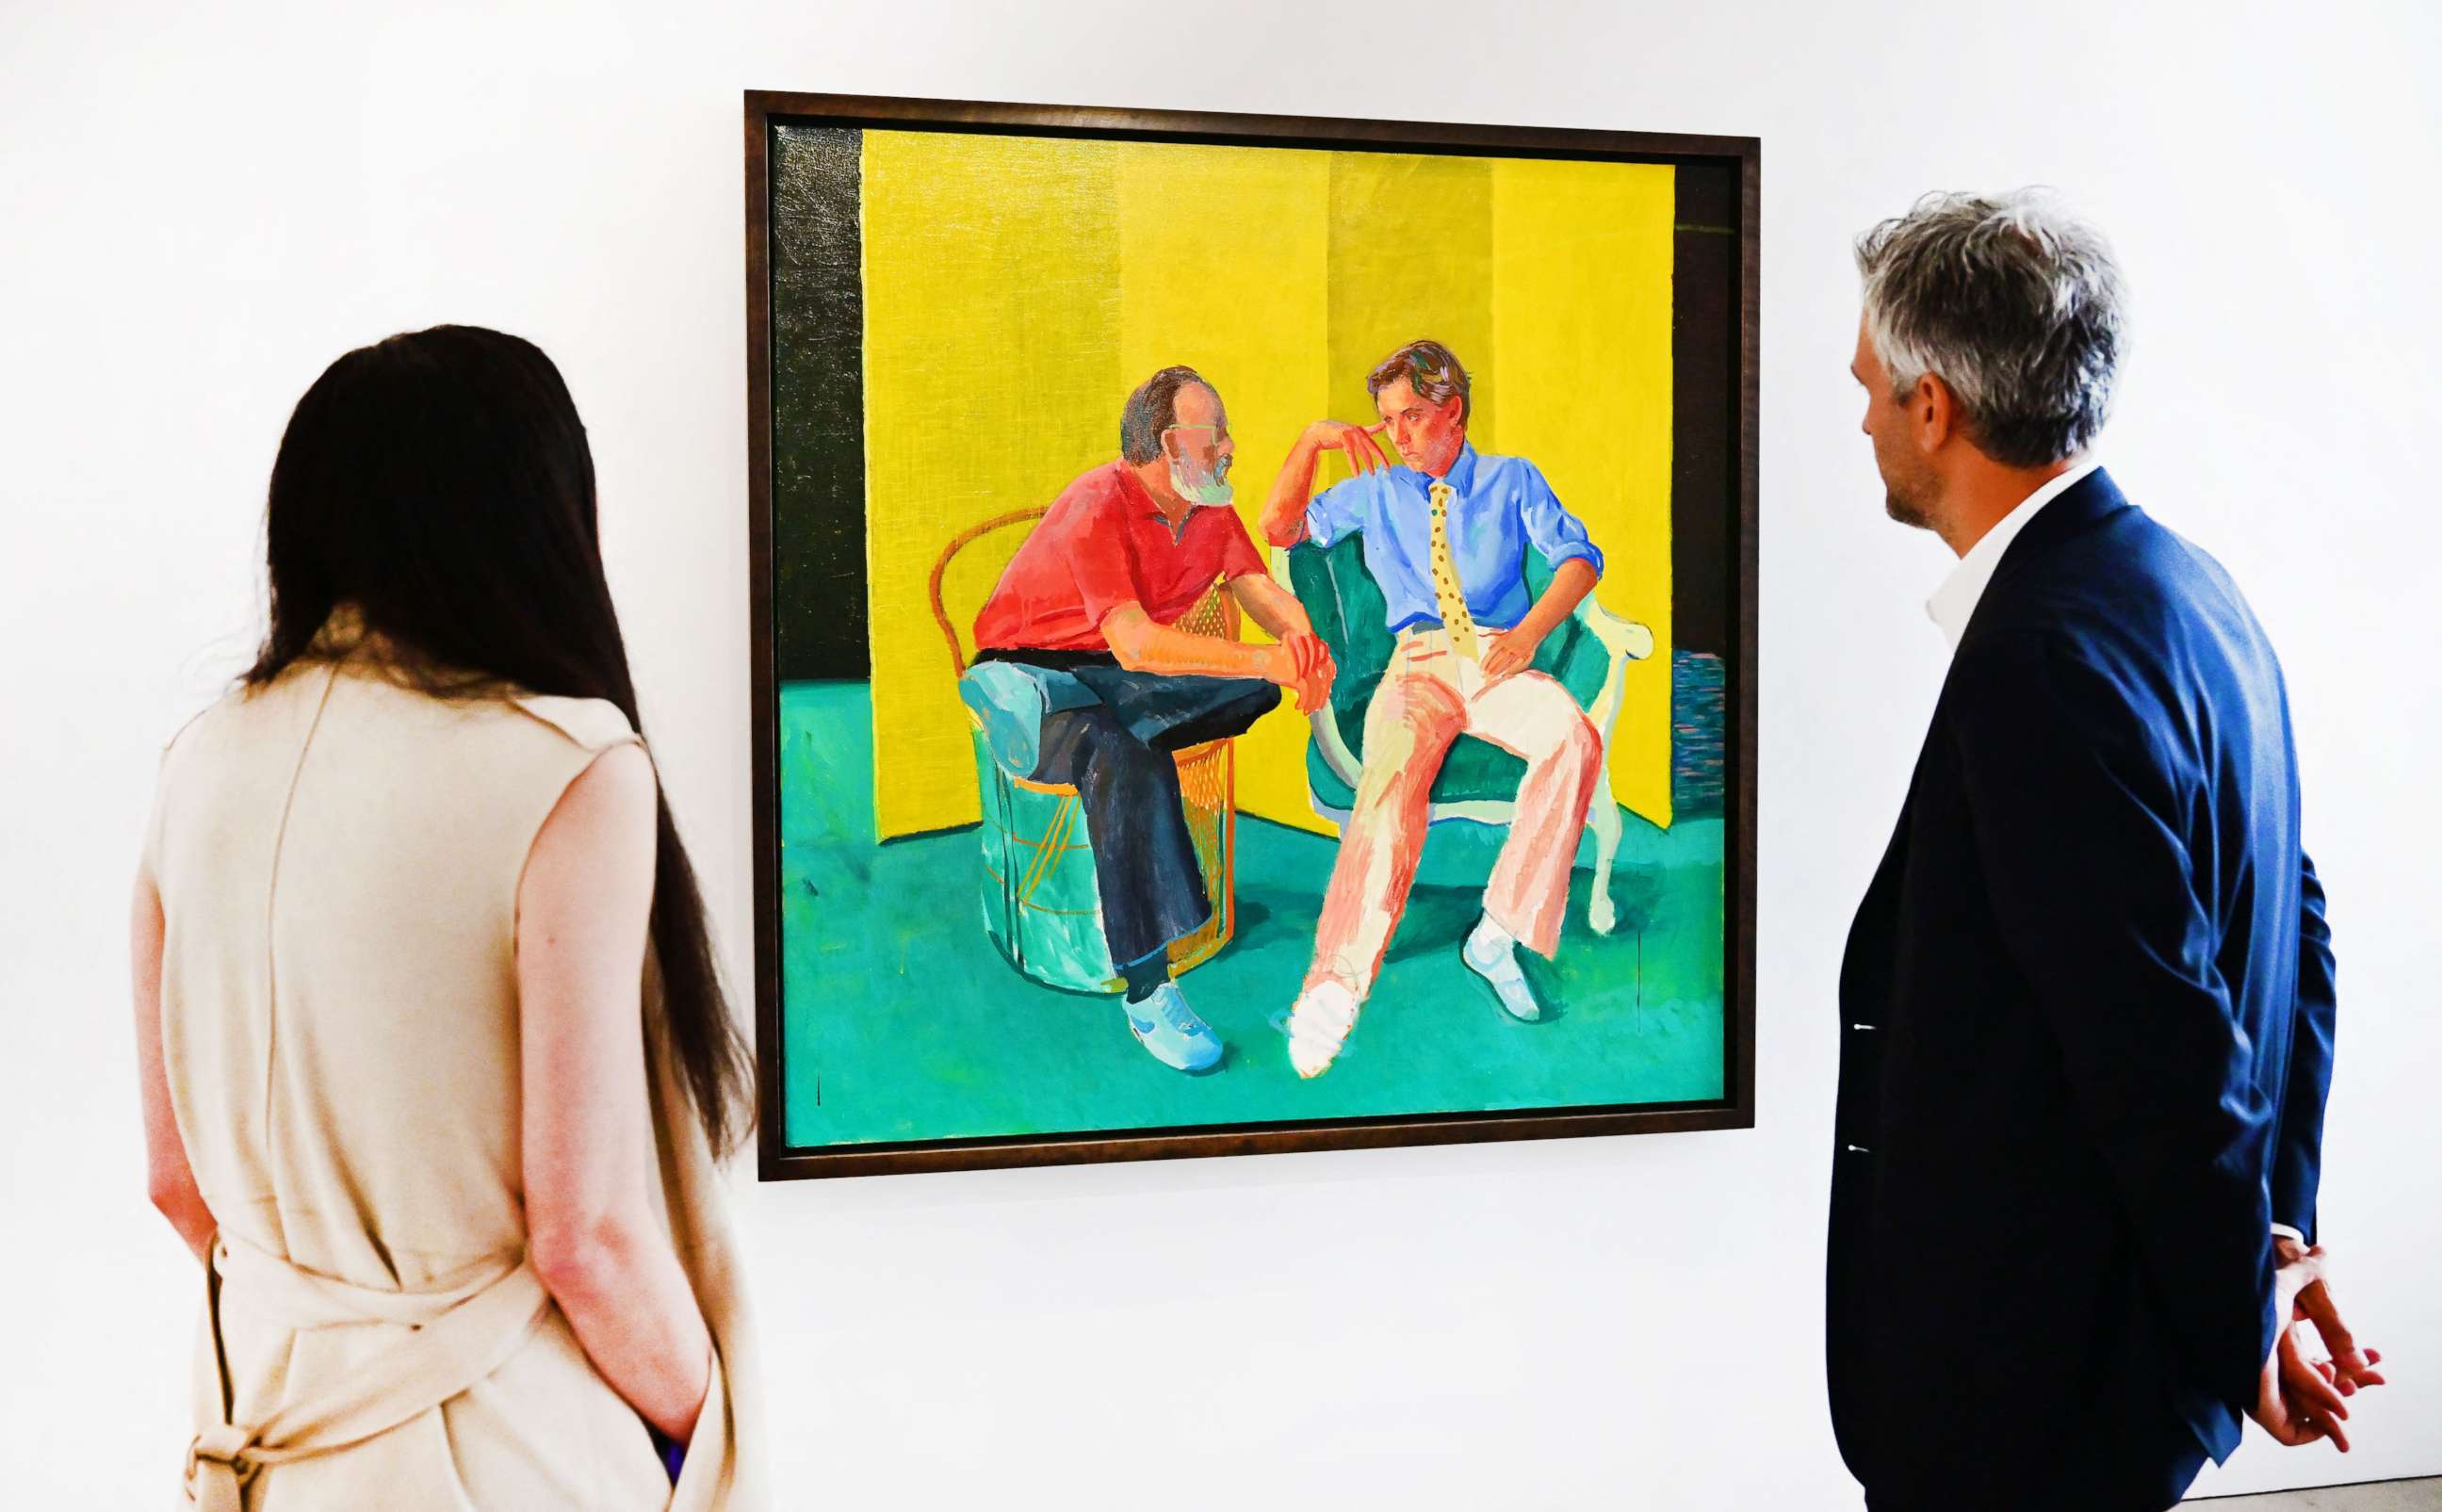 PHOTO: In this file photo taken on October 12, 2022 Christie's staff view "The Conversation" by David Hockney on display at Christie's Los Angeles in Beverly Hills, California during the media preview of "Visionary: The Paul Allen Collection."